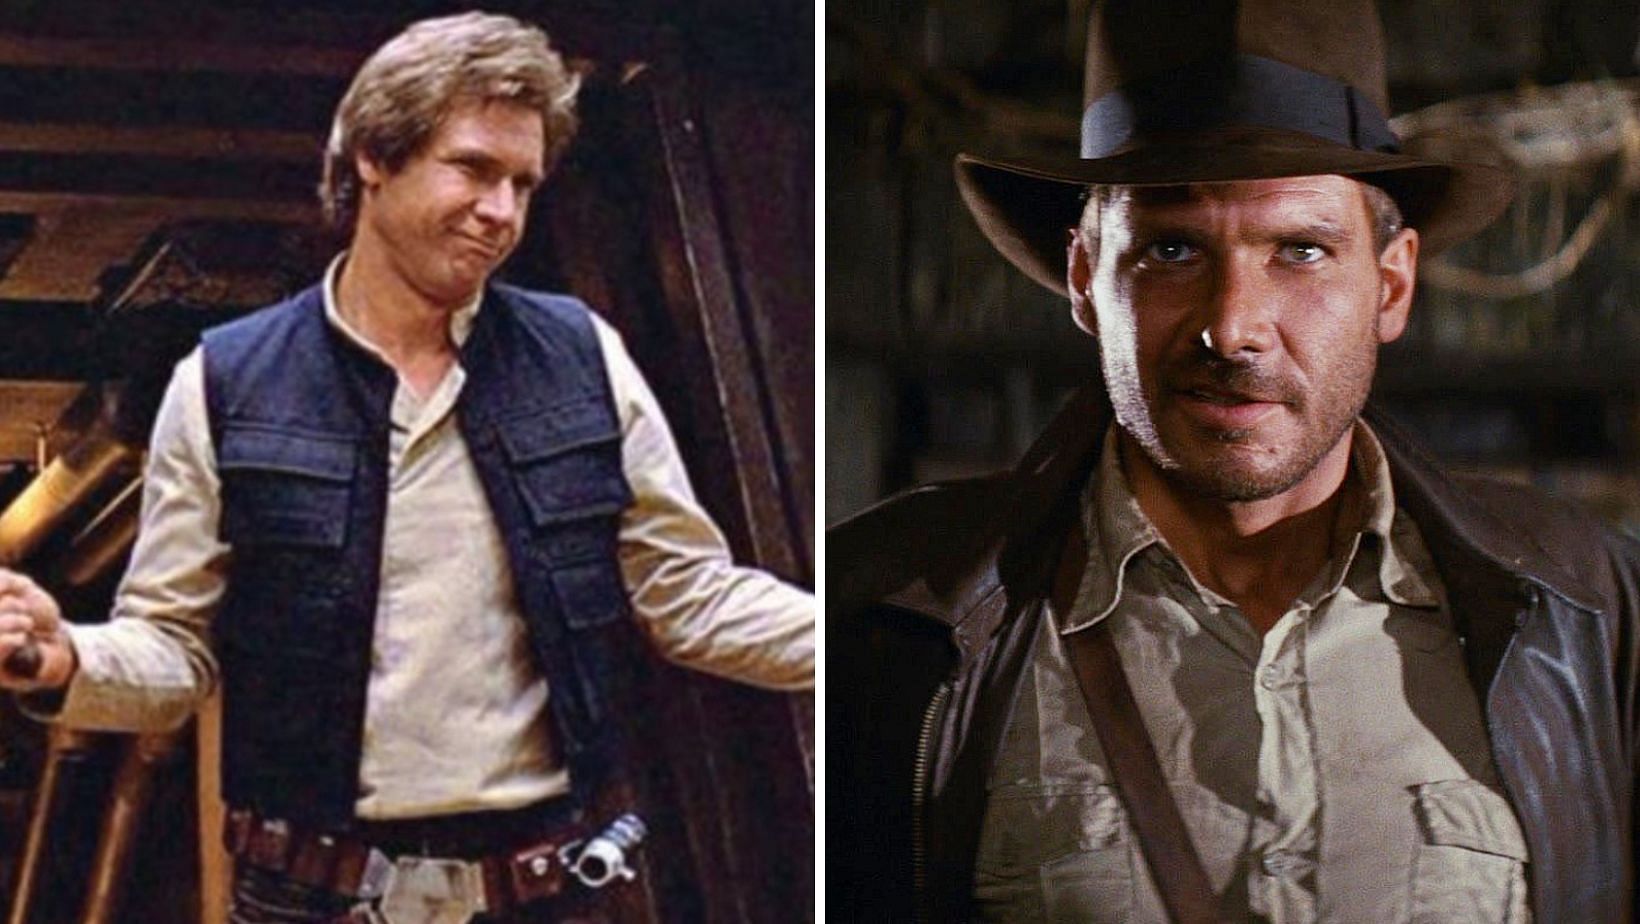 Harrison Ford brings humor and laughter to his respective movies, adding to their appeal as lovable rogue characters (Image via Sportskeeda and Lucasfilm)